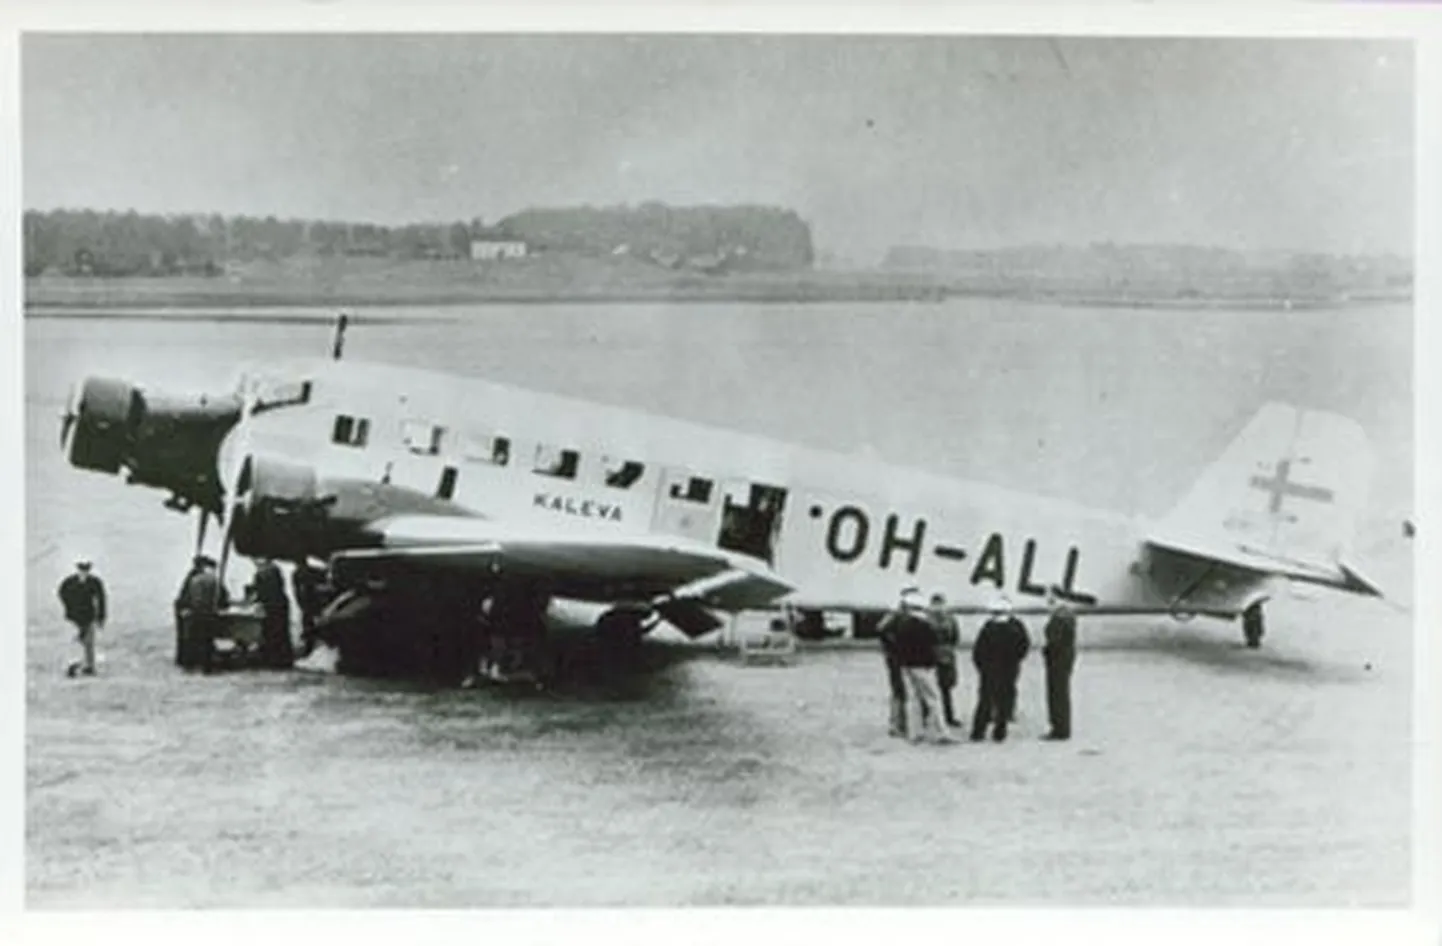 Finnish passenger plane Kaleva was shot down by Soviet aircraft on the eve of World War Two.